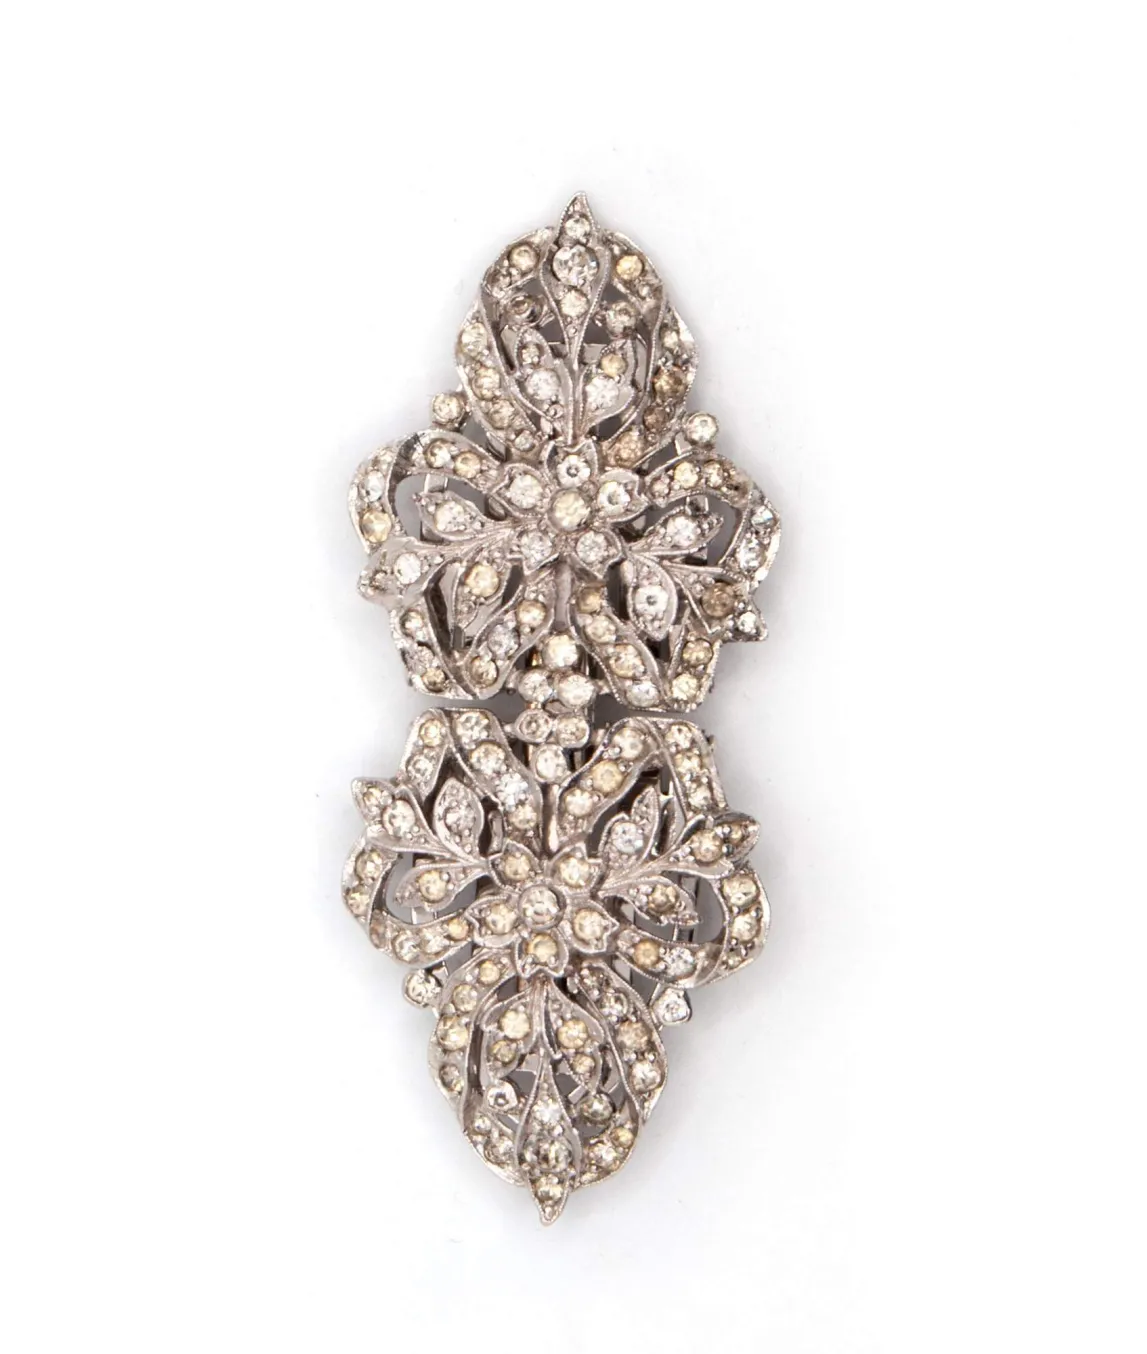 Ciro double clip brooch with floral pattern in clear paste